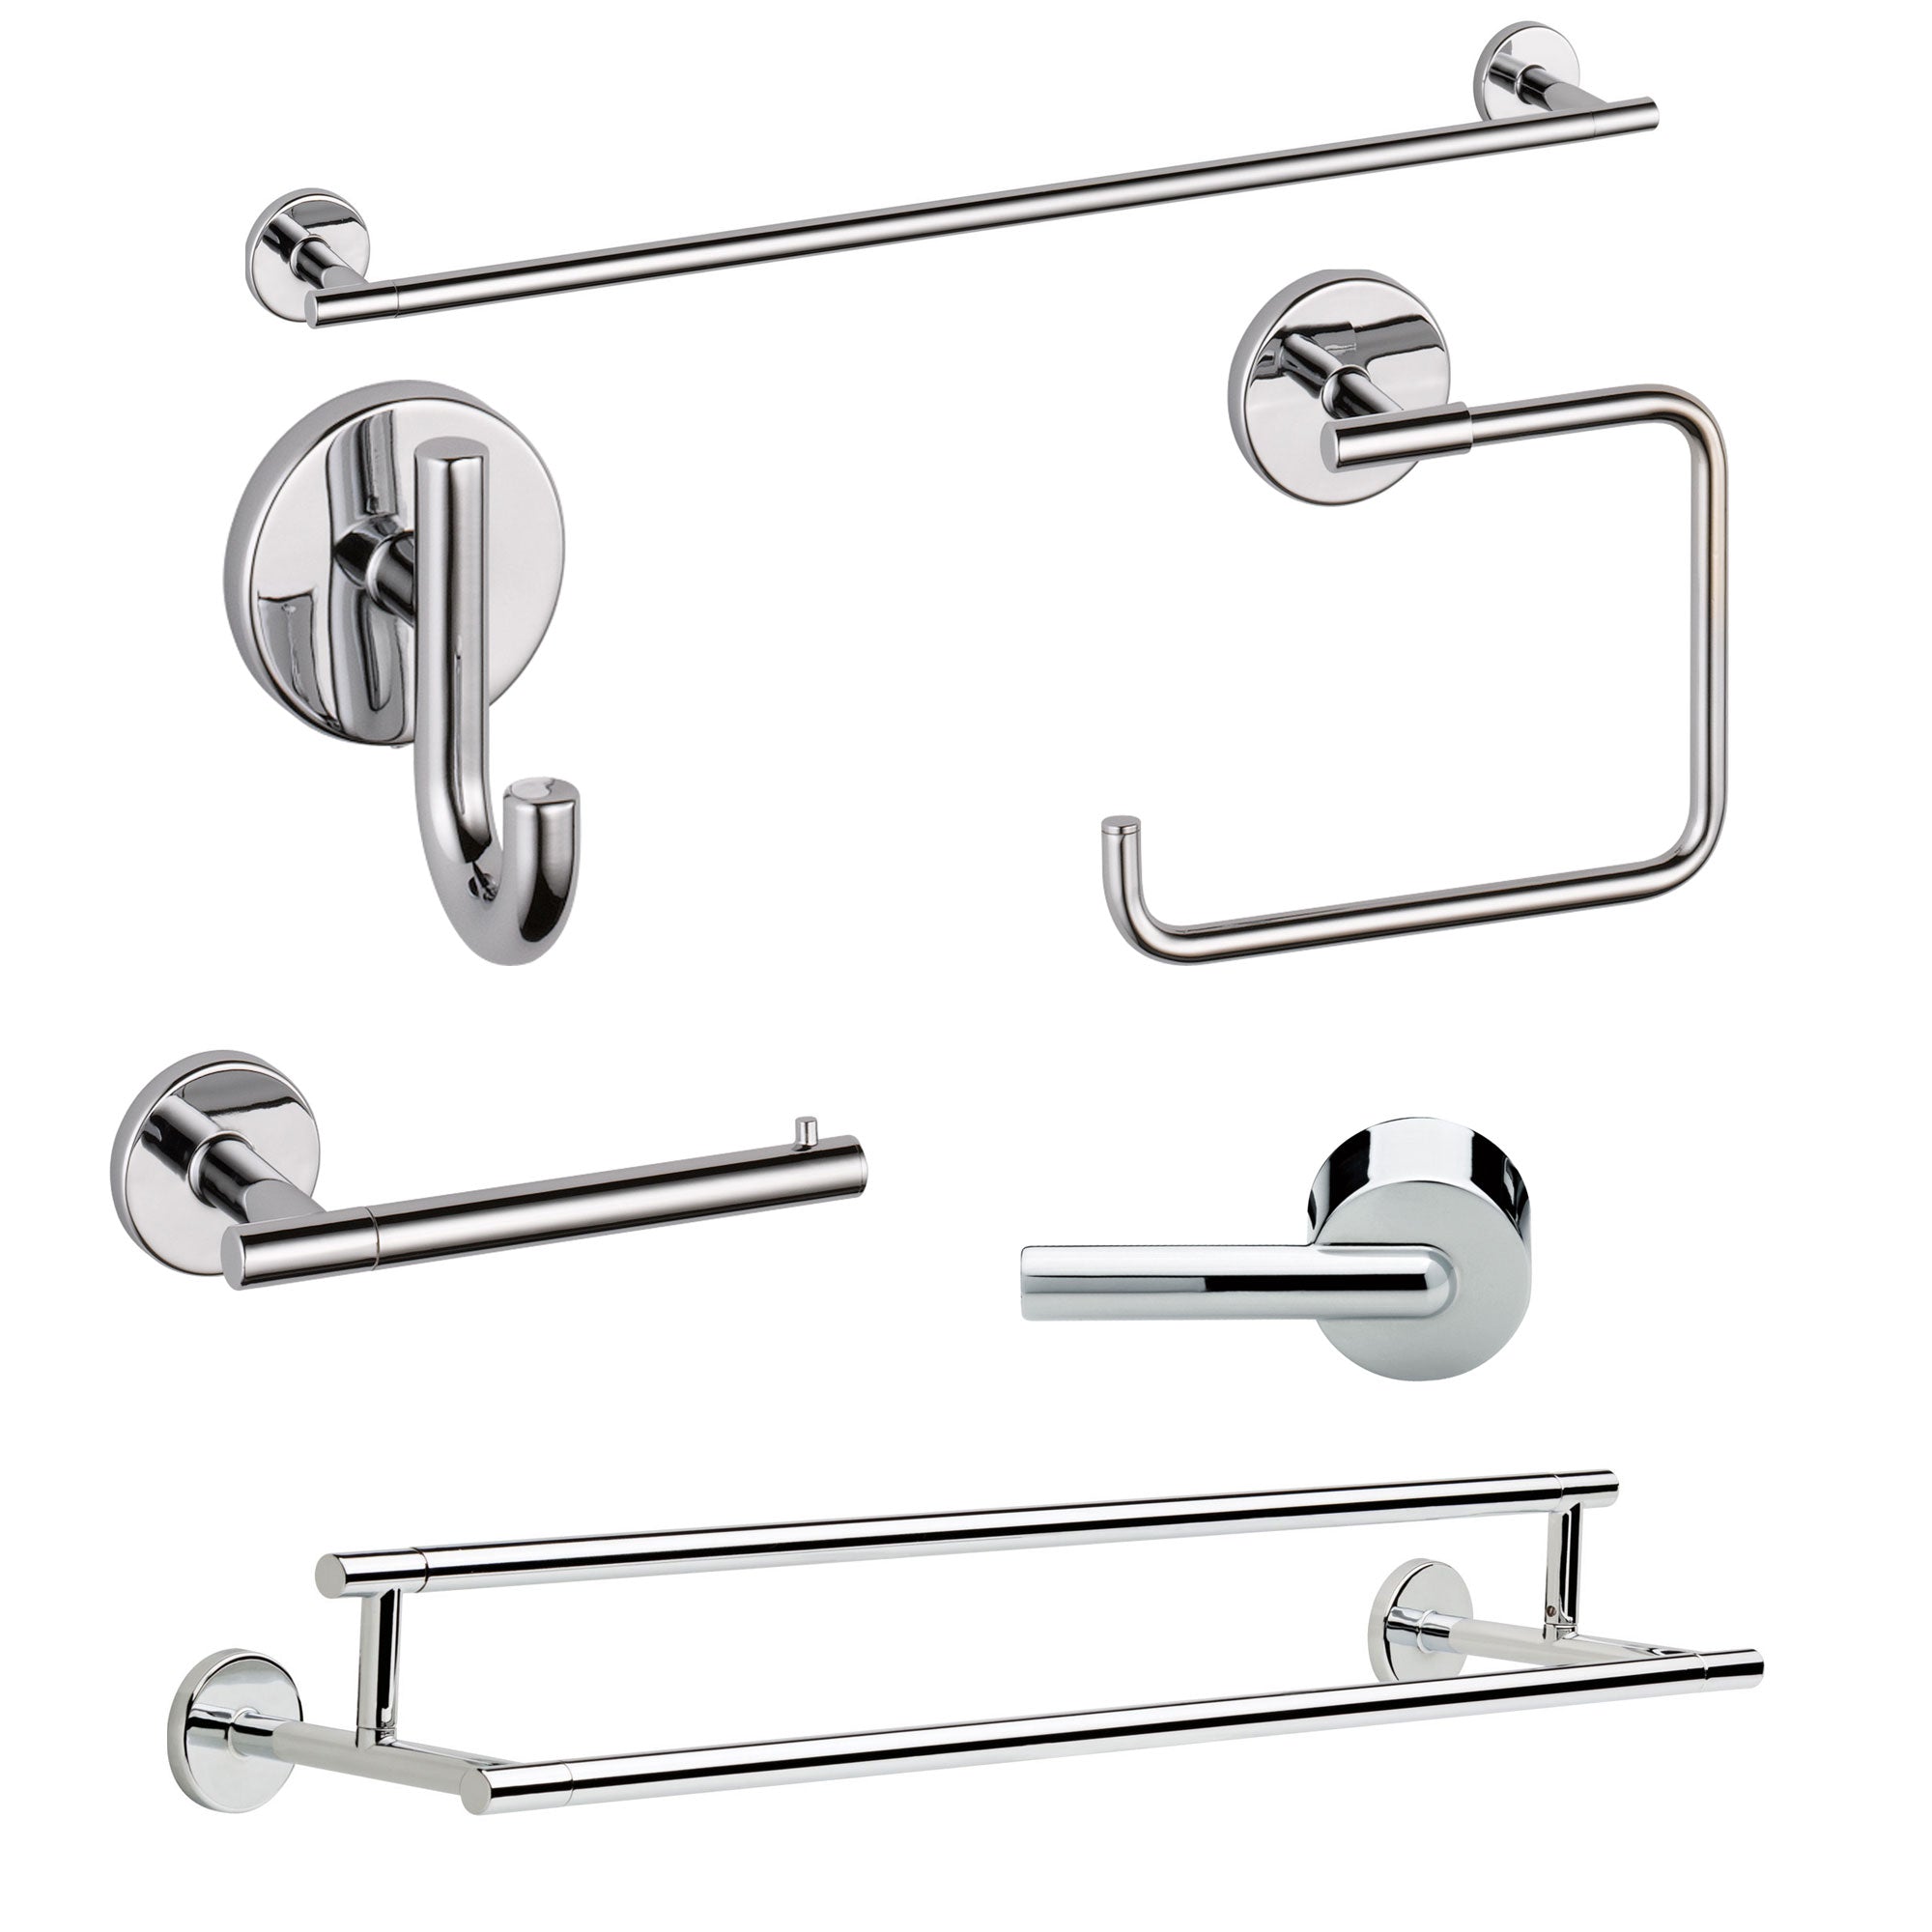 Delta Trinsic Chrome DELUXE Accessory Set Includes: 24" Towel Bar, Paper Holder, Towel Ring, Robe Hook, Tank Lever, & 24" Double Towel Bar D10003AP